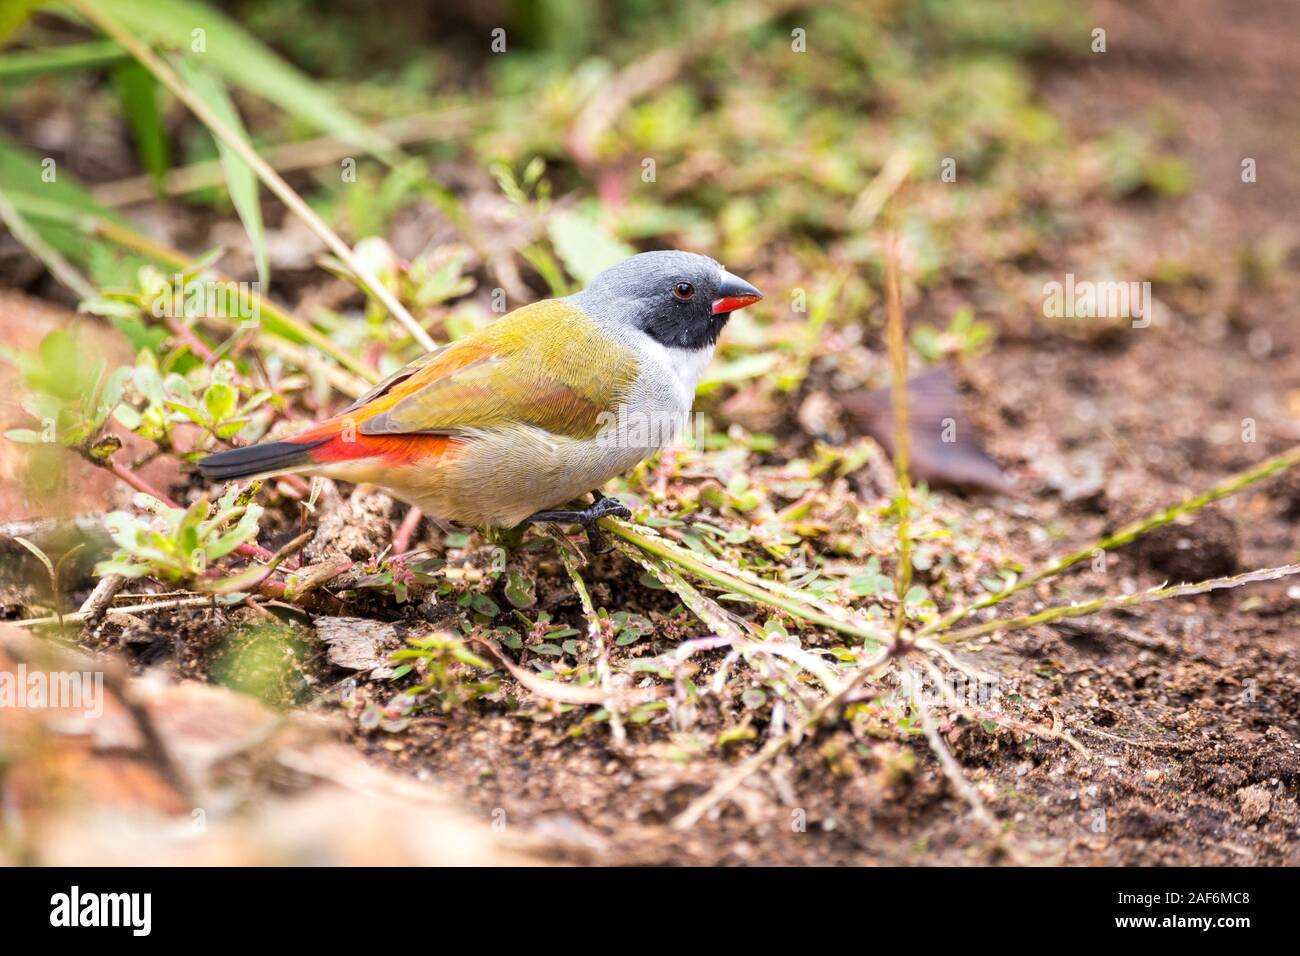 Close up of a swee waxbill (Coccopygia melanotis) sitting on a blade of grass on the ground Stock Photo